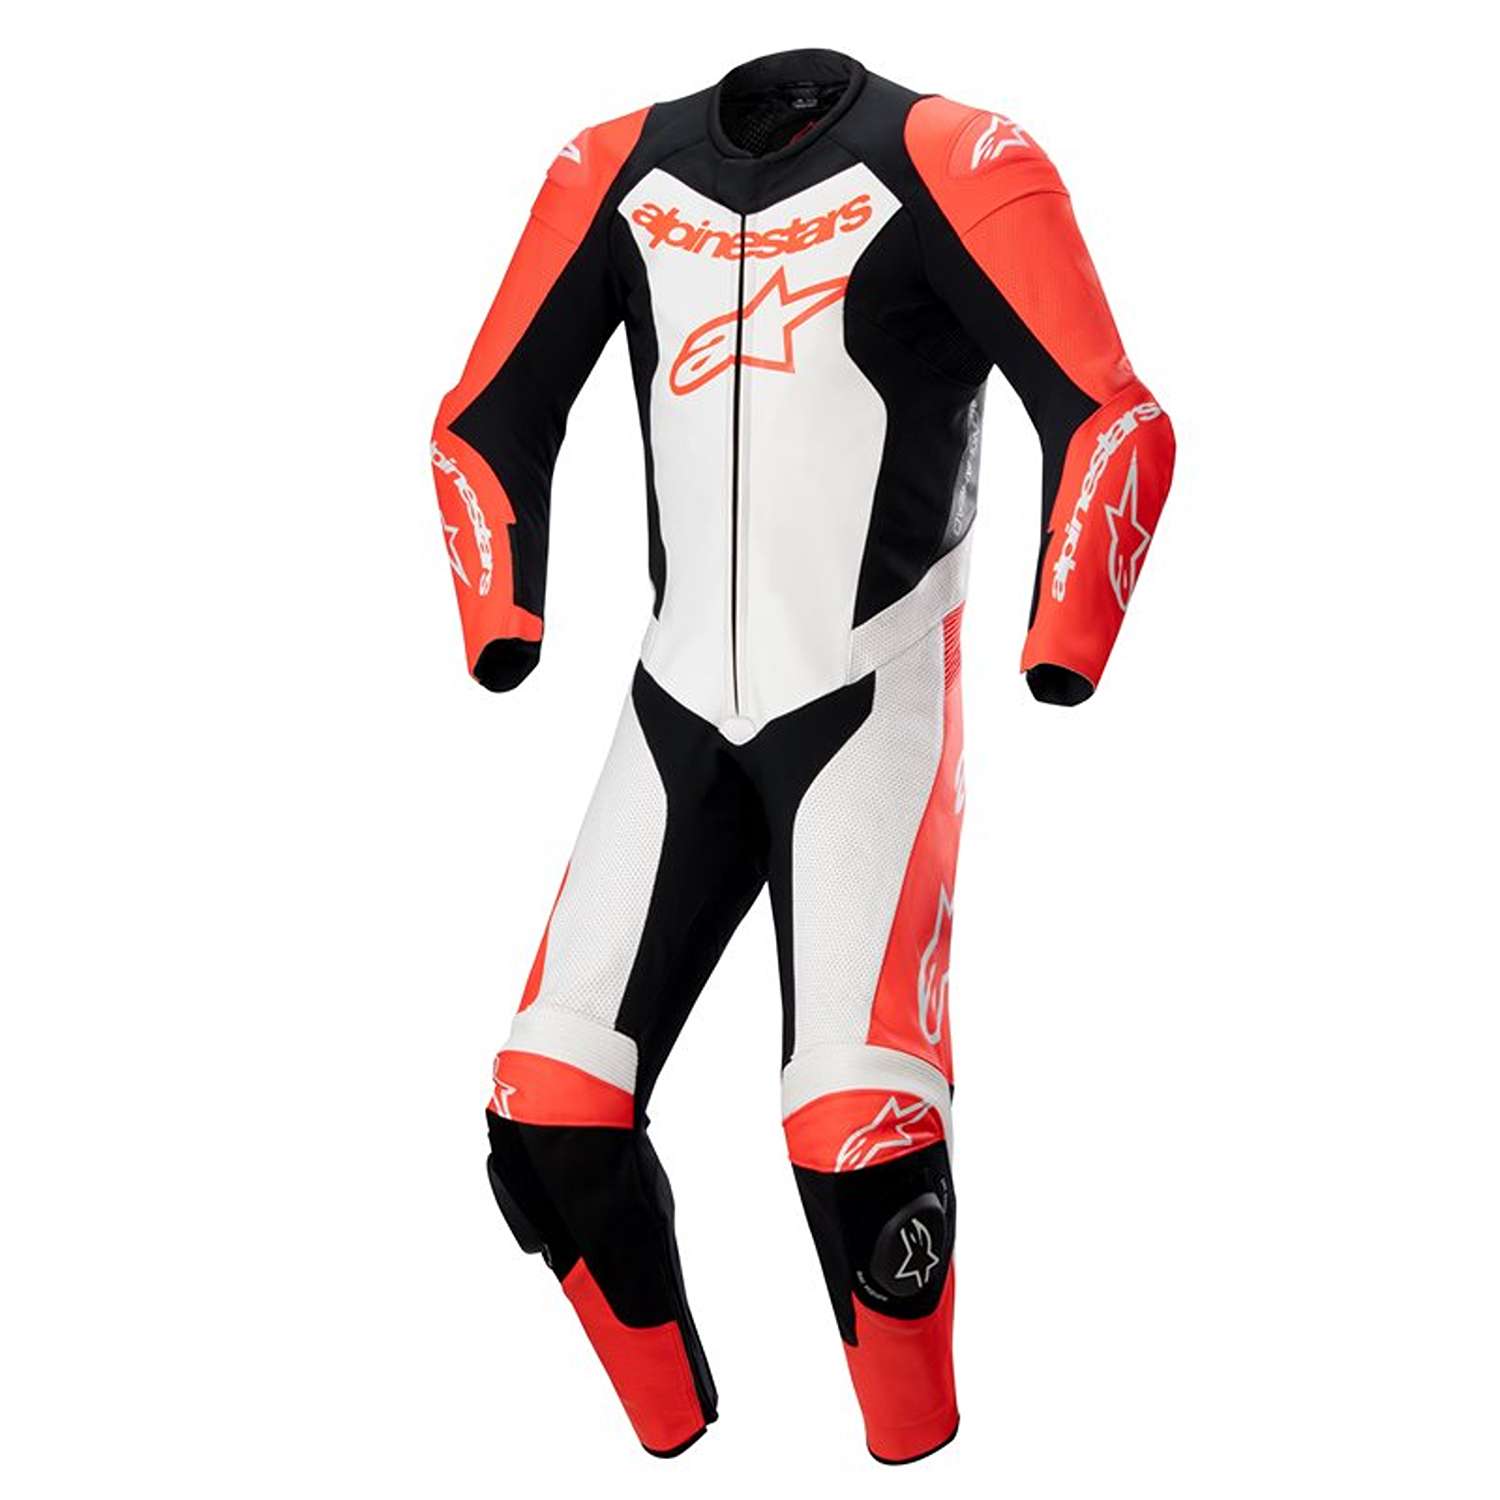 Image of Alpinestars Gp Force Lurv 1Pc Leather Suit Red Fluo White Black Size 58 ID 8059347340401